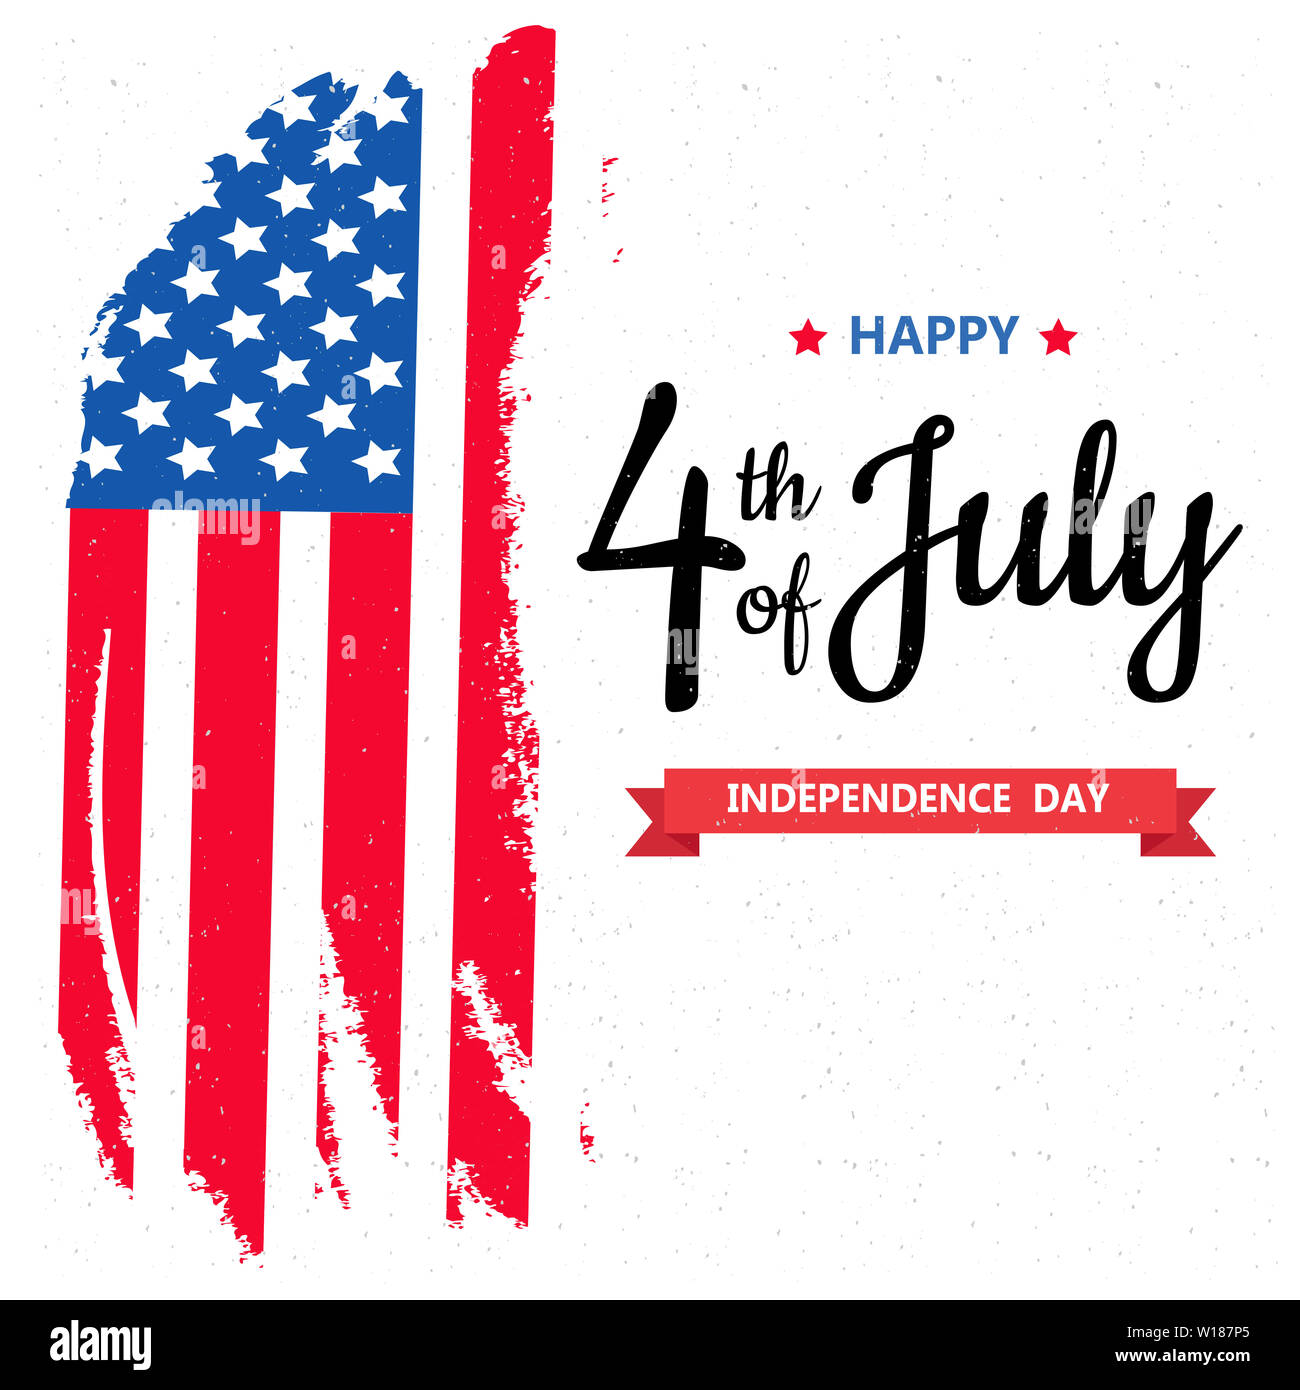 Happy independence day or 4th of July vector background or banner graphic Stock Photo